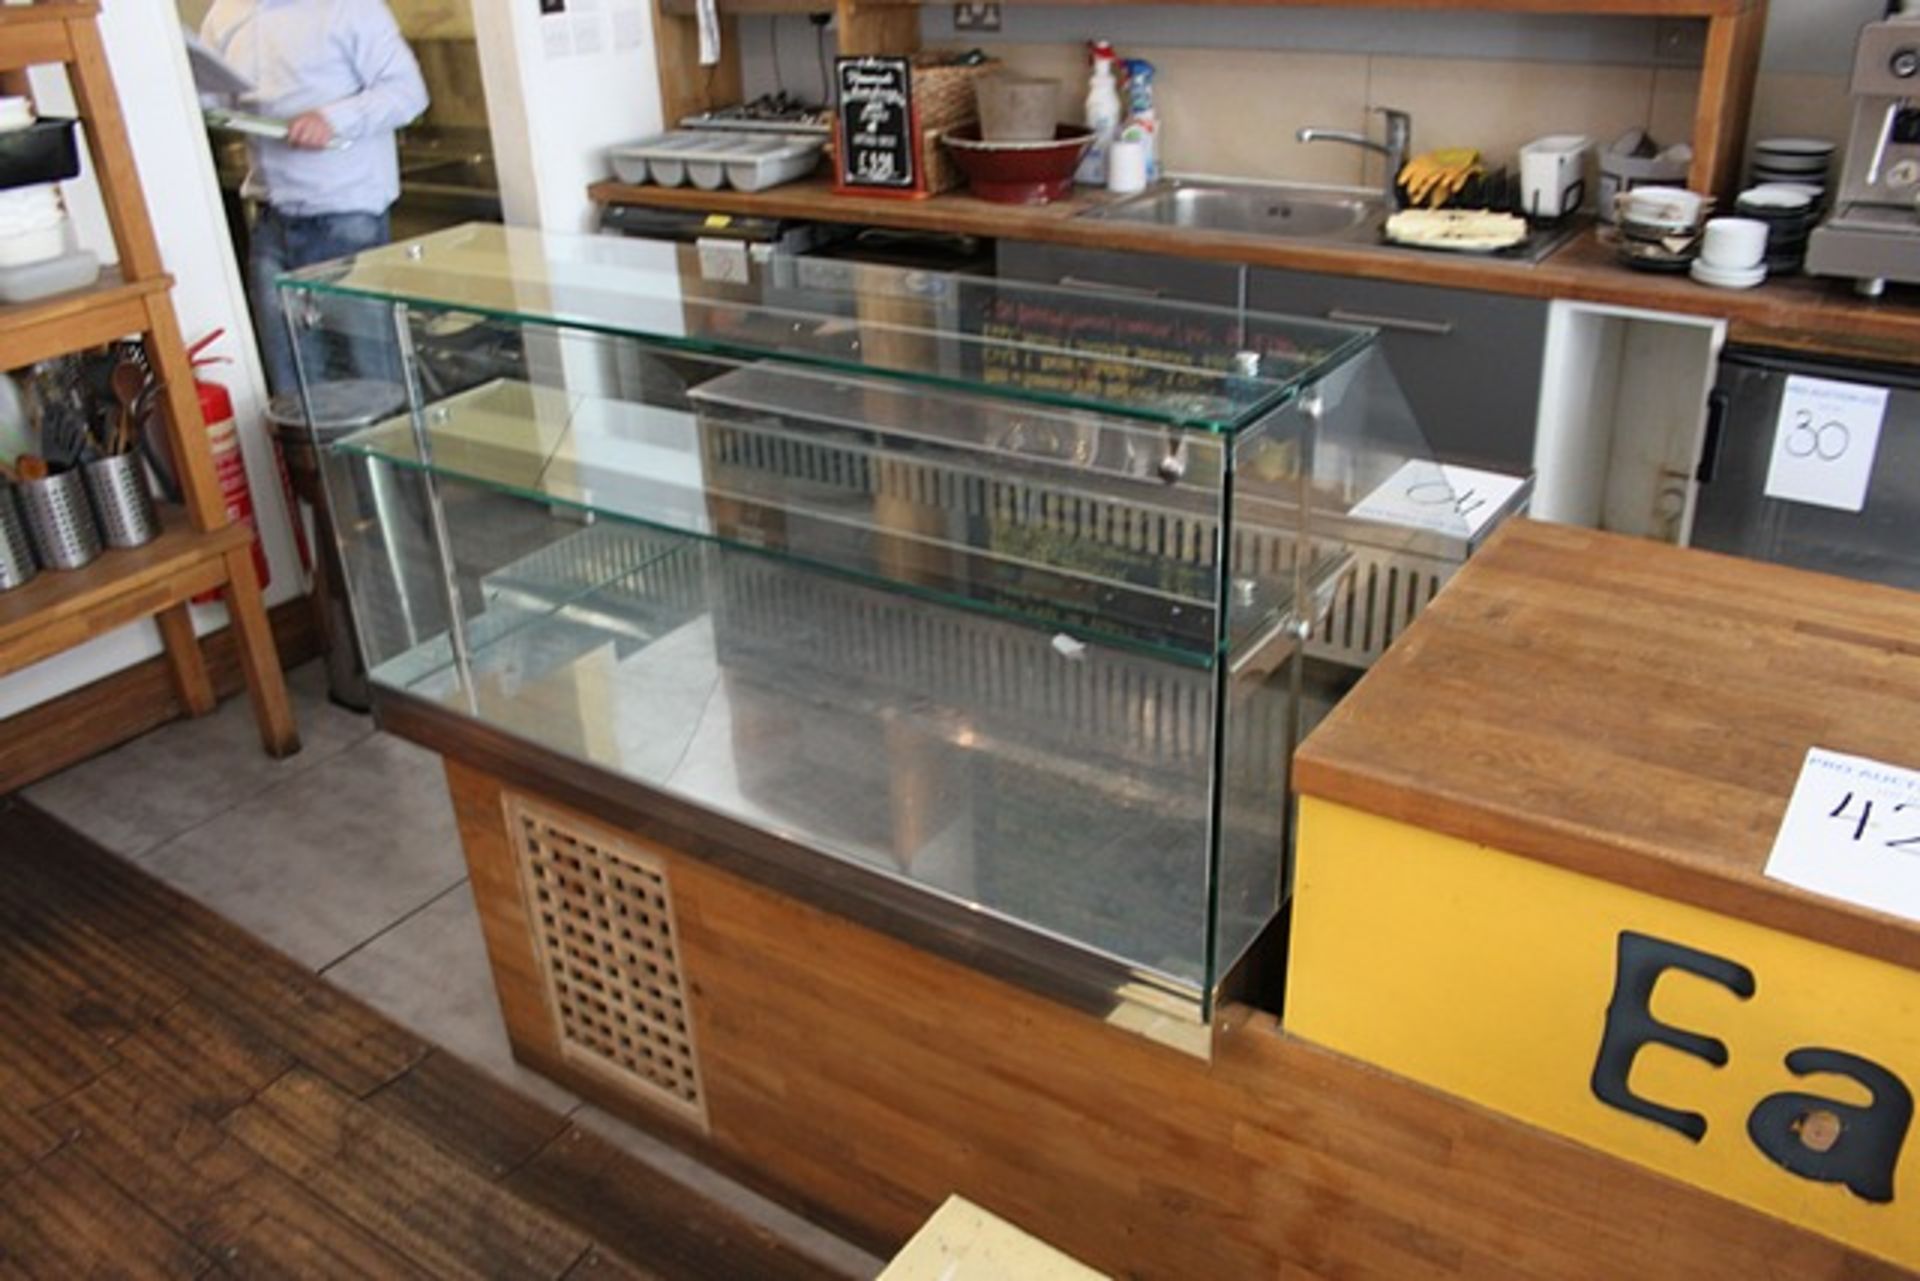 Refrigerated preparation counter serve over glass fronted counter with internal shelf and open